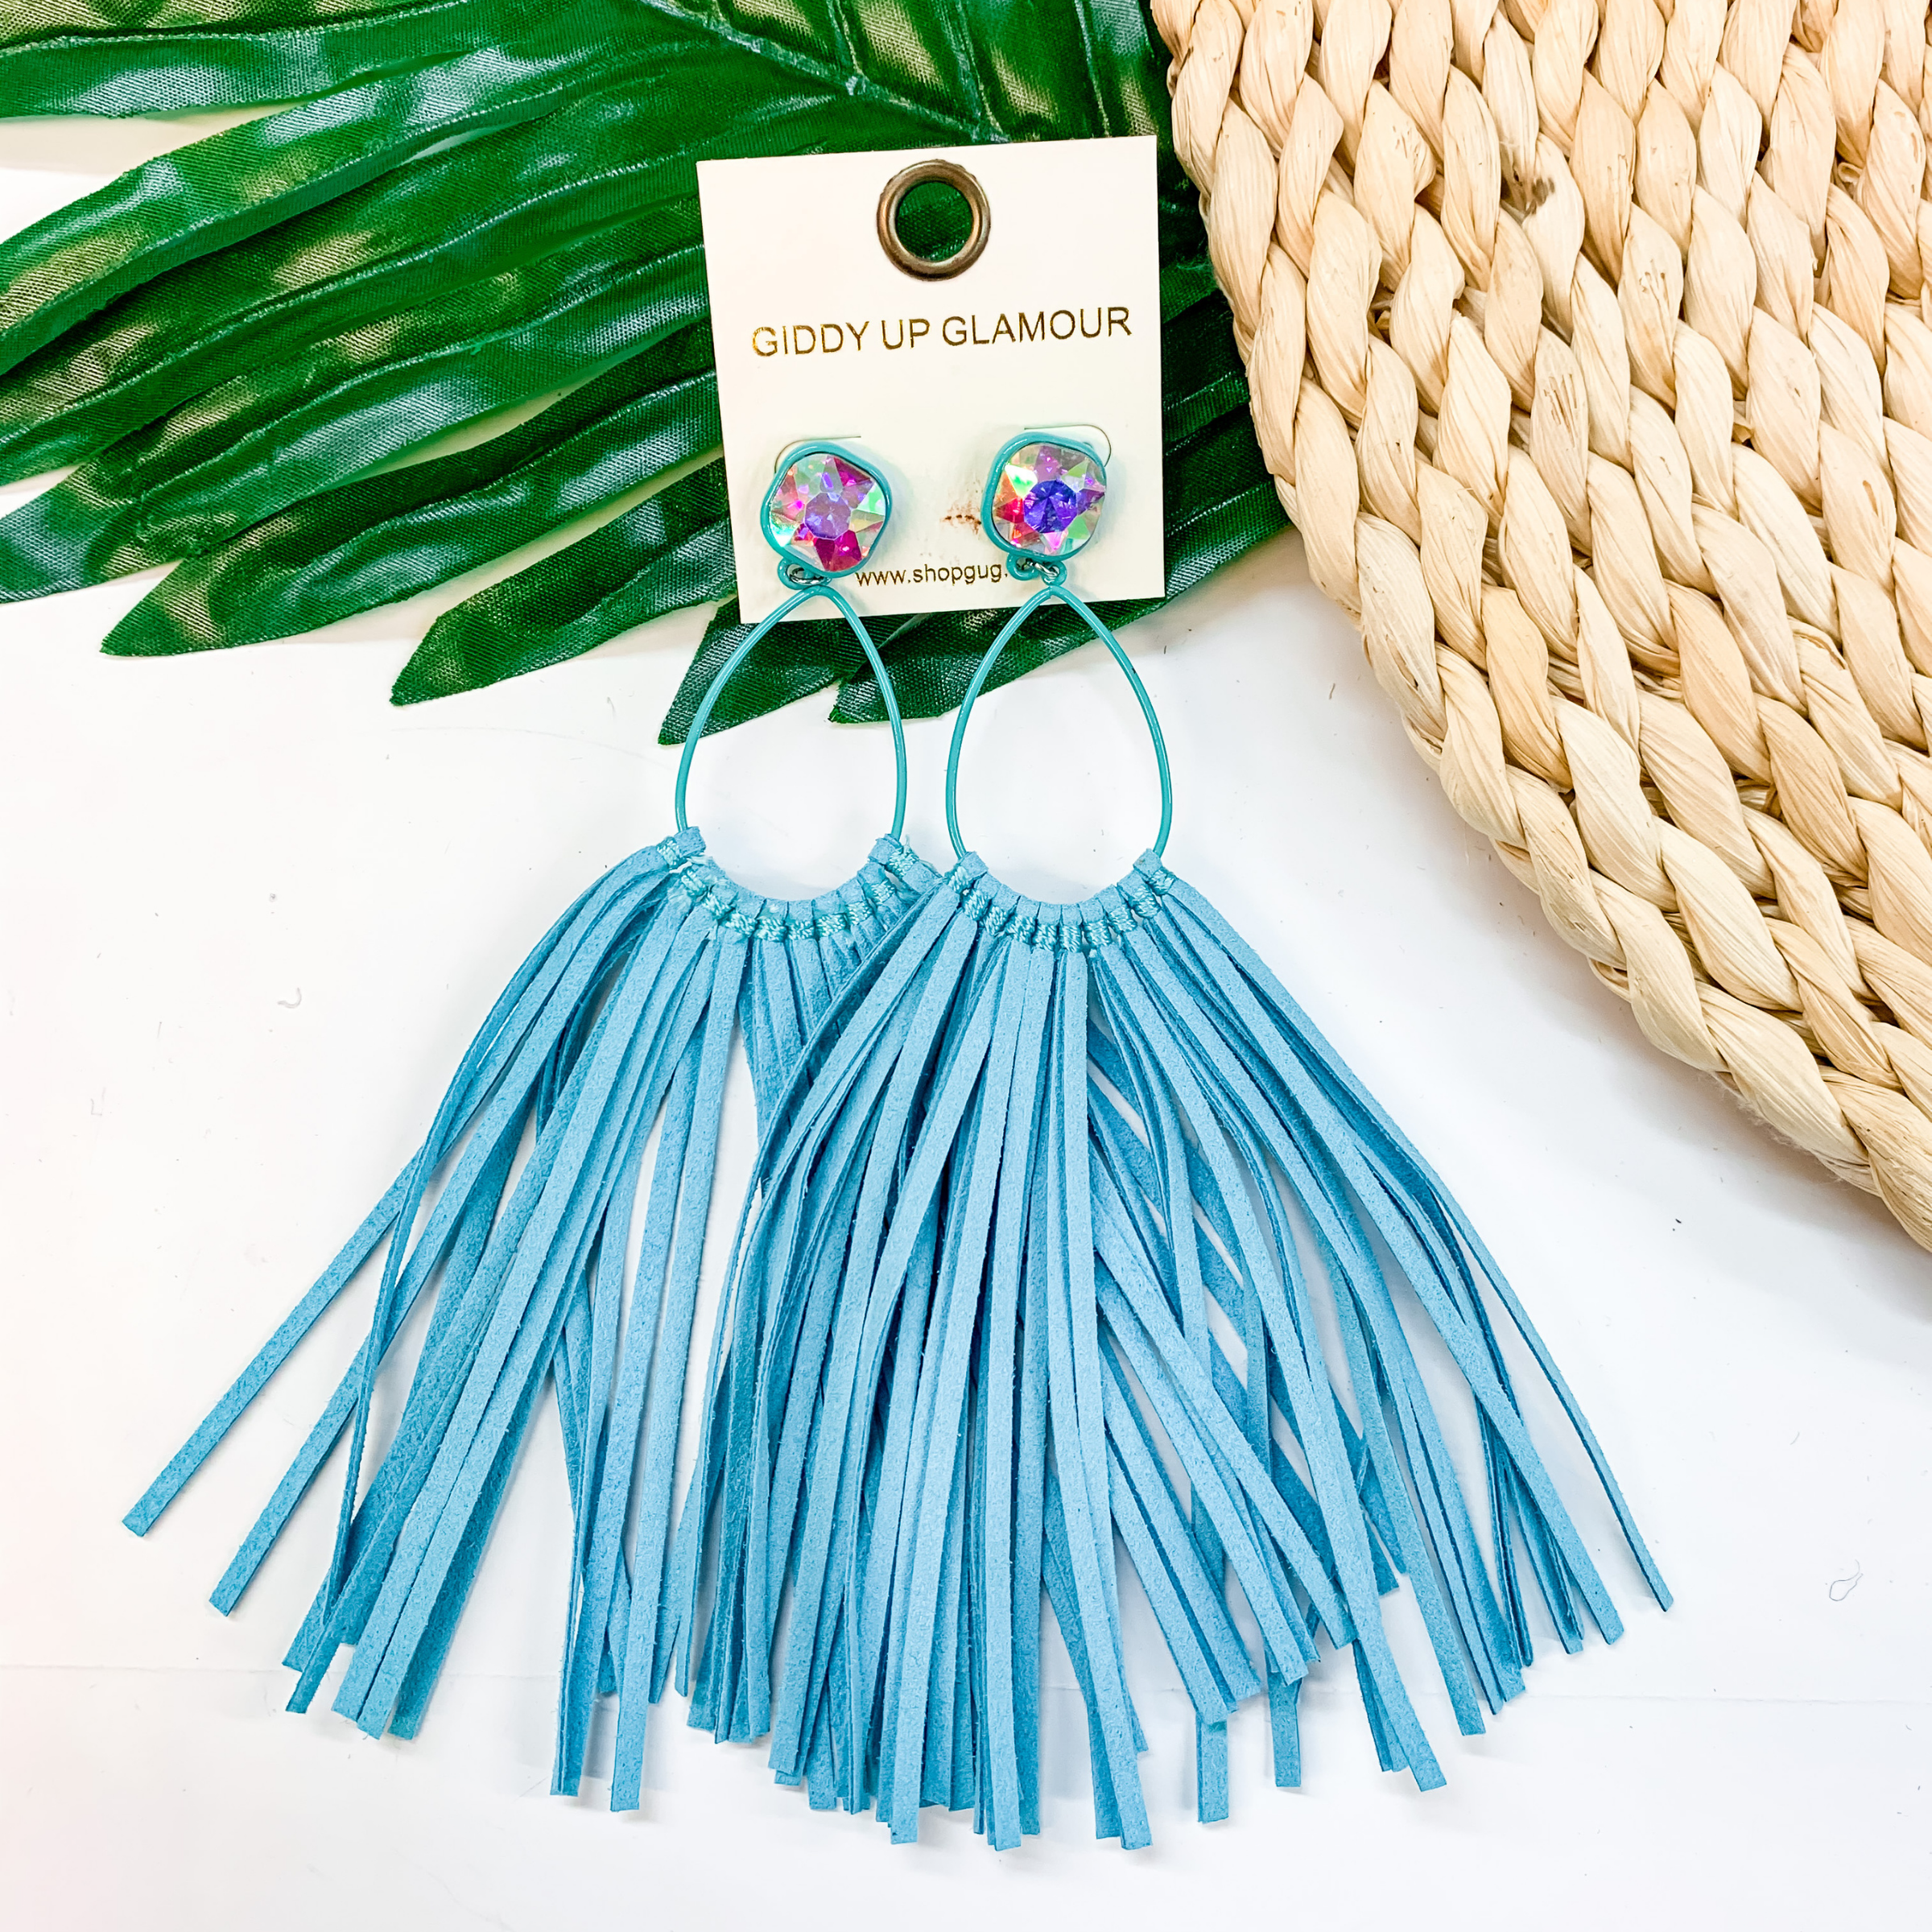 Teardrop Leather Tassel Earrings With Glass Stone in Turquoise - Giddy Up Glamour Boutique